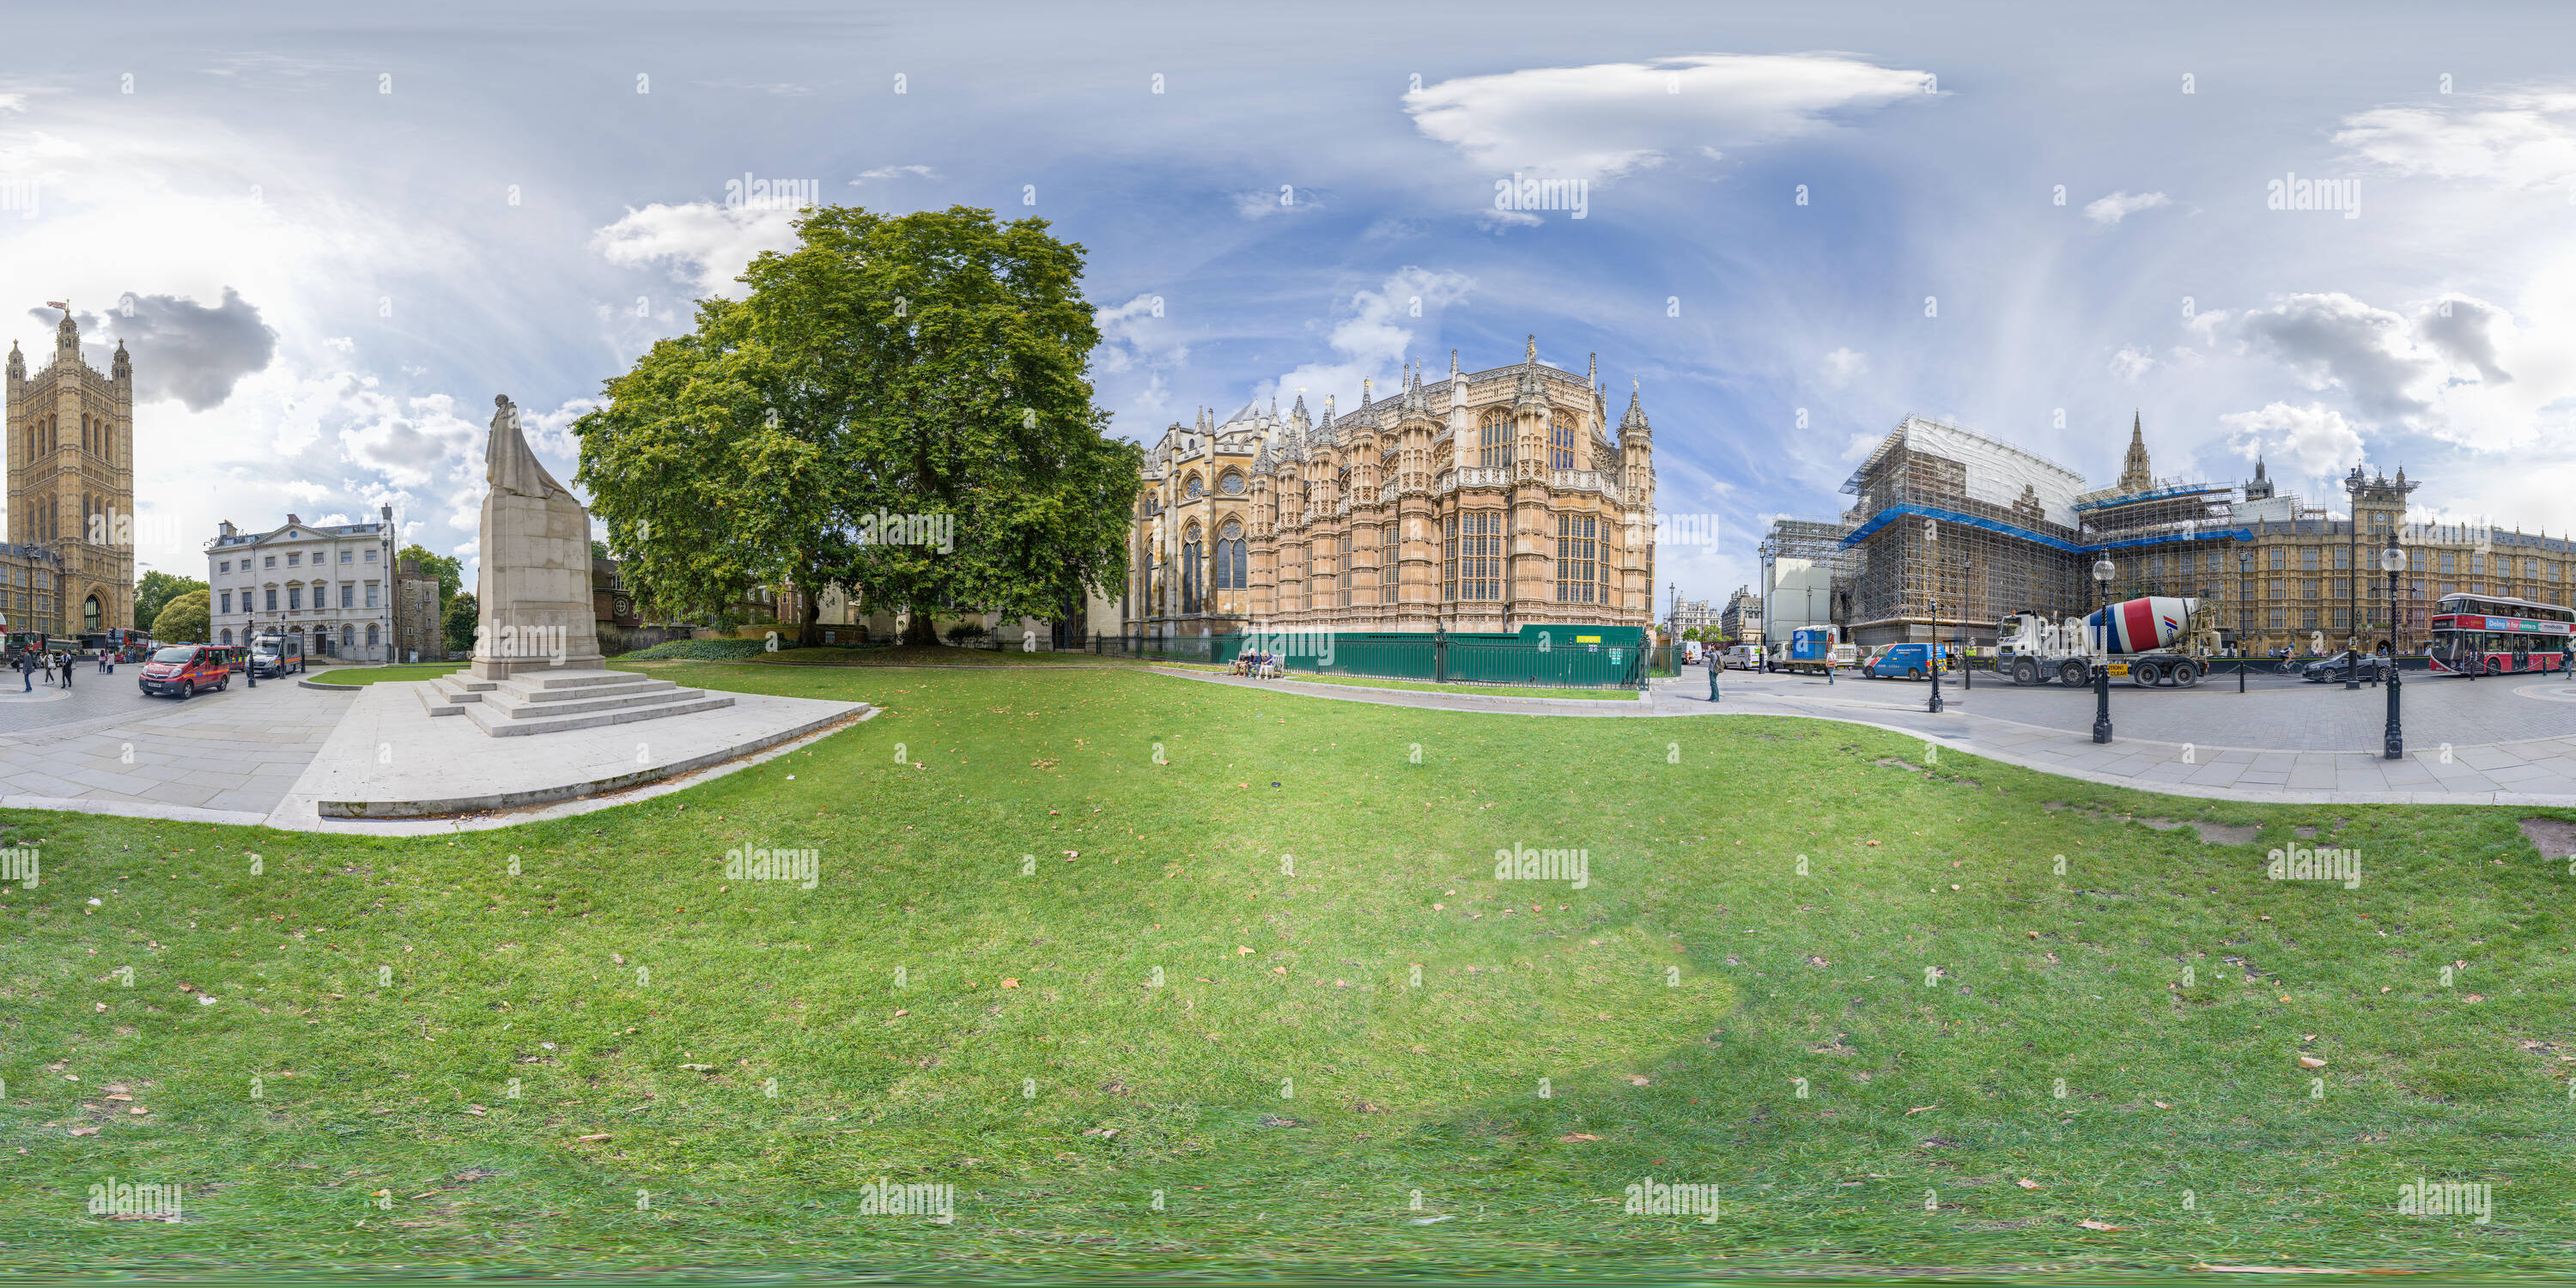 360 degree panoramic view of East end of Westminster abbey, next to a statue of king George V and opposite the Houses of parliament (Westminster palace), London, England.